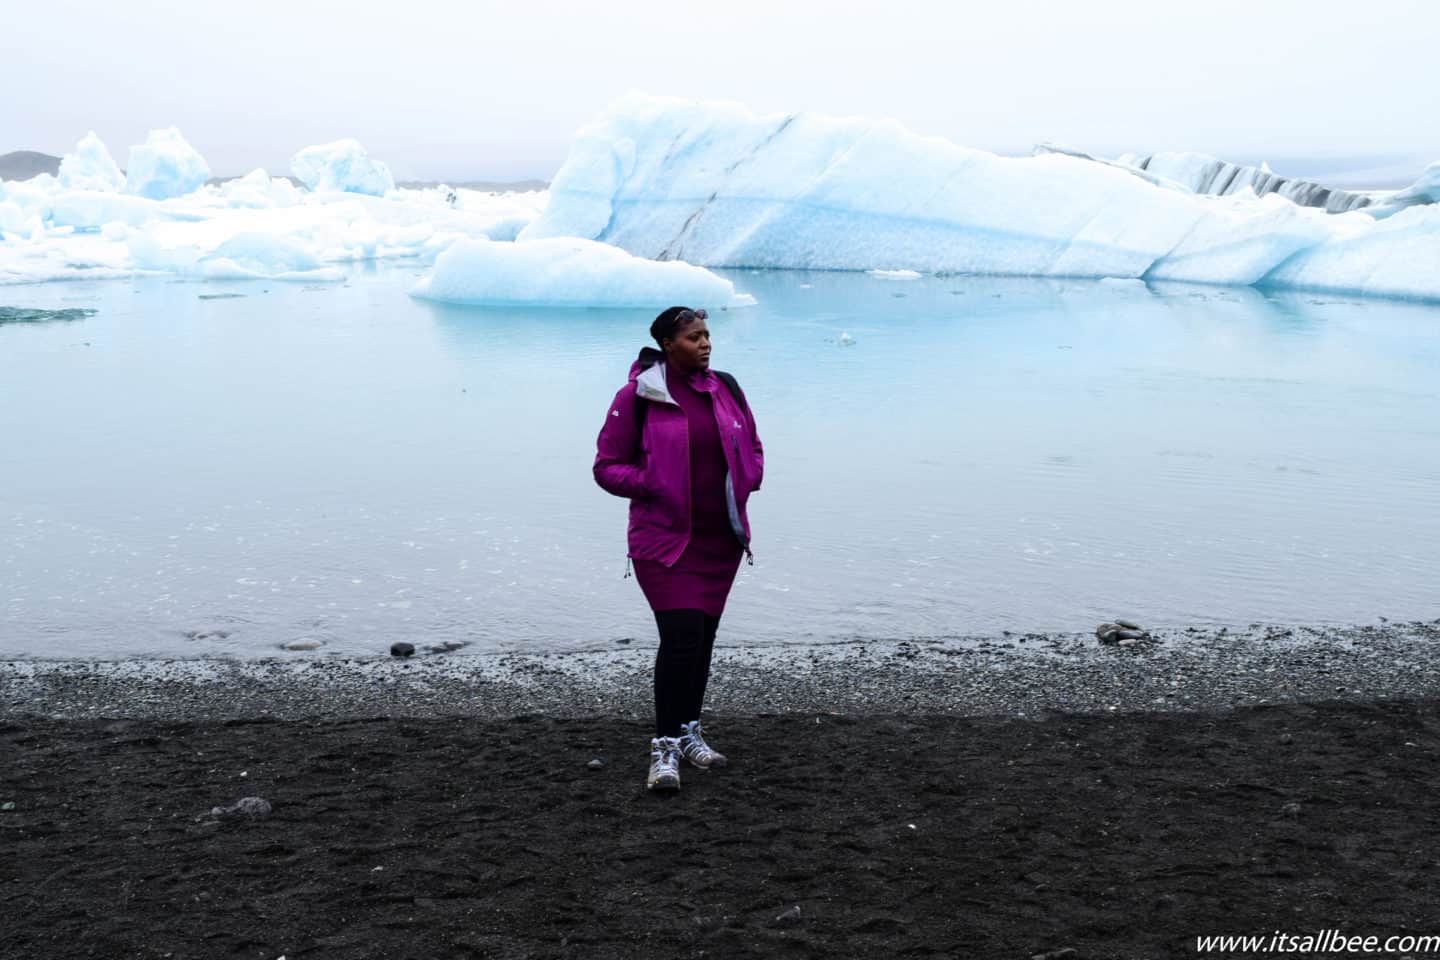 Iceland essentials packing lists items - The Best Gloves For Iceland In Winter and Summer! - Essential items whether exploring Reykjavik or hiking in Iceland. #itsallbee #traveltip #packinglist #bluelagoon #glacierlagoon #glacier #lavafields #whattopack #icelandtravel